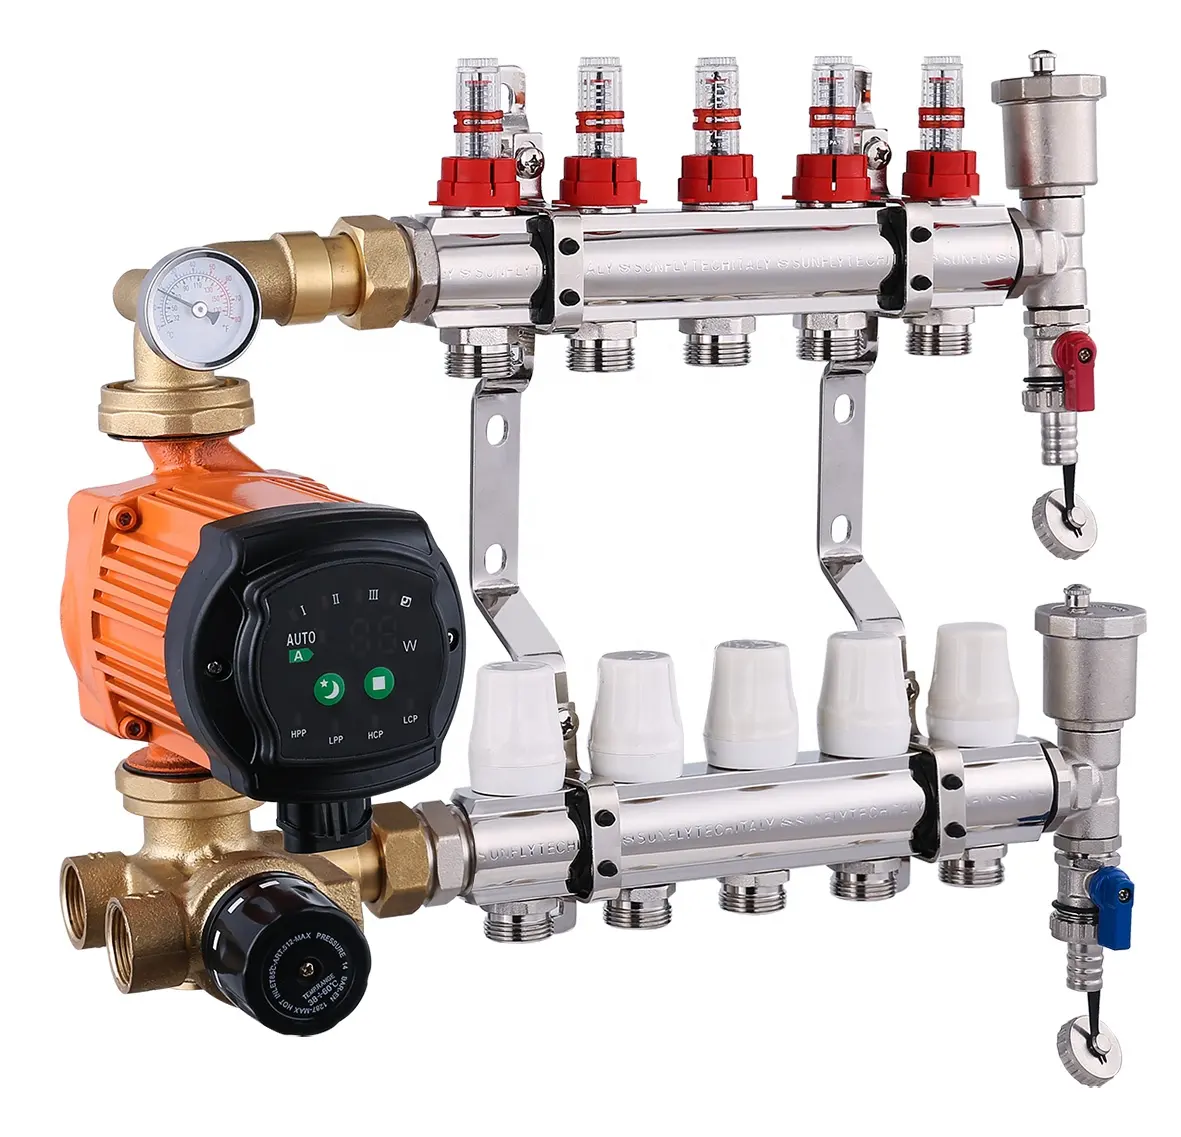 Water mixing pump valves for underfloor heating brass manifold with mixing water pump